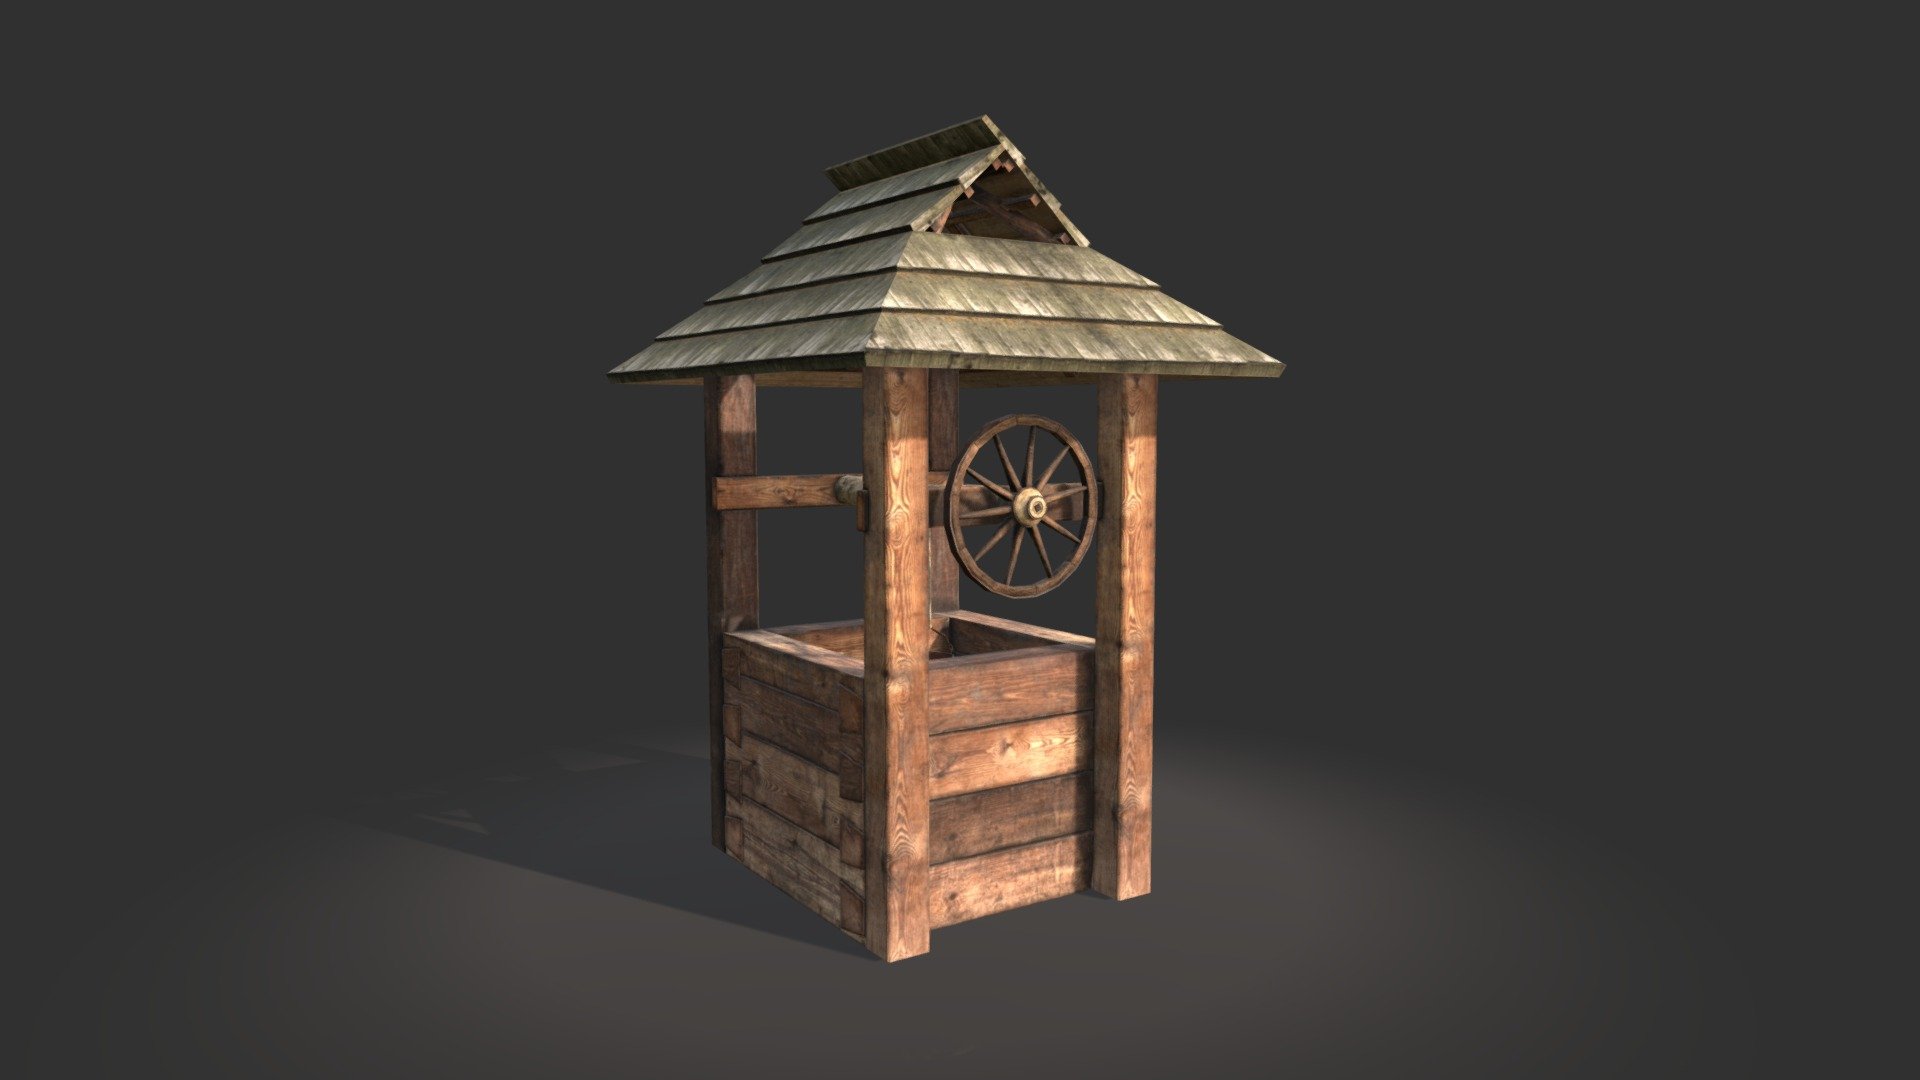 3d model of old Village Well.
Architecture from west Europe - Poland 




Originally created with 3ds Max 2014.

Unit system is set to centimetre.

Model is built to real-world scale

Texture Set PBR: Diffuse, Base Color, IOR, Gloss, Heigh, IOR, Normal, Reflection, Specular

Previews rendered in Mormoset Toolbag and 3ds Max 2014 using V-ray Adv 2.3.

.obj/fbx format is recommended for import in other 3d software.

If your software doesn't support .obj format, please use .3ds/fbx format; .obj, format was exported from 3ds Max. The geometry for .obj format is set to quads. .max files can be loaded in 3ds Max 2014 or higher. In order to use Vray rendering setups and materials, V-ray Adv 2 or higher is required
 - Well - Slav Architecture - Buy Royalty Free 3D model by danielmikulik 3d model